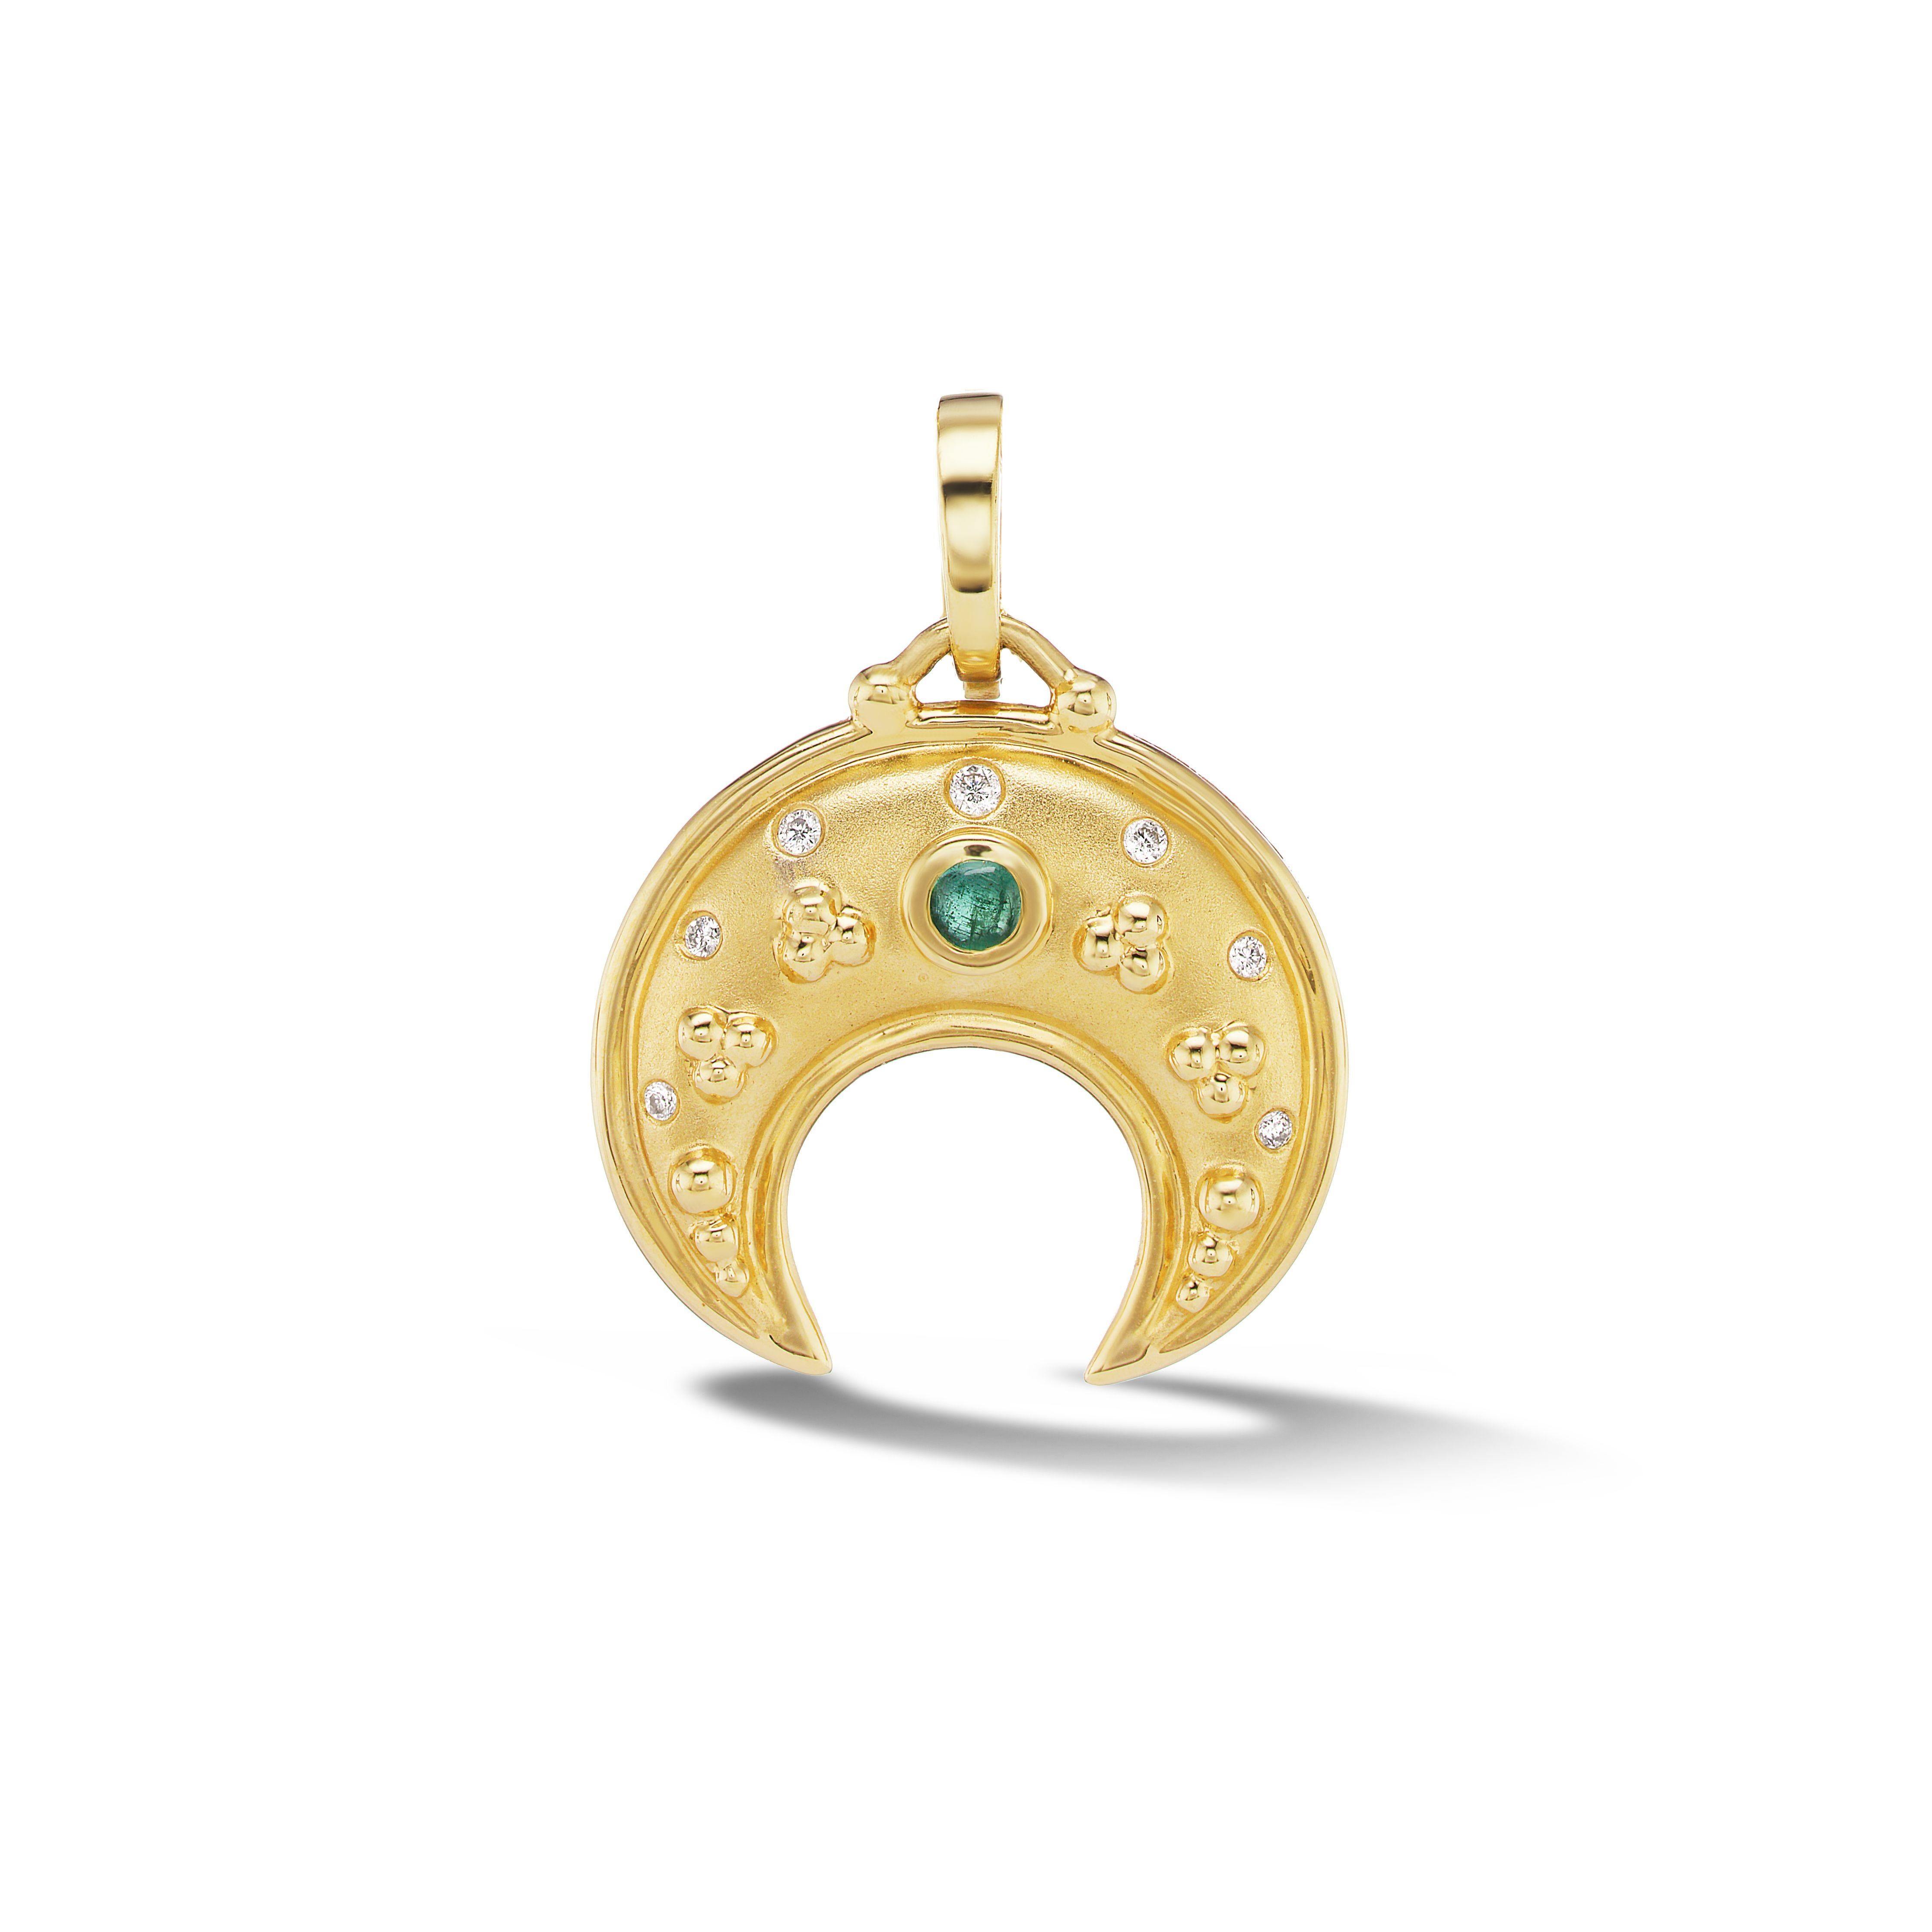 A lunala amulet is a crescent moon shaped pendant that was worn by girls in Ancient Rome as a lucky charm and to protect against evil forces. Our lunala is adorned with granules, typical of an ancient lunala charm, and a glowing emerald. Legends say